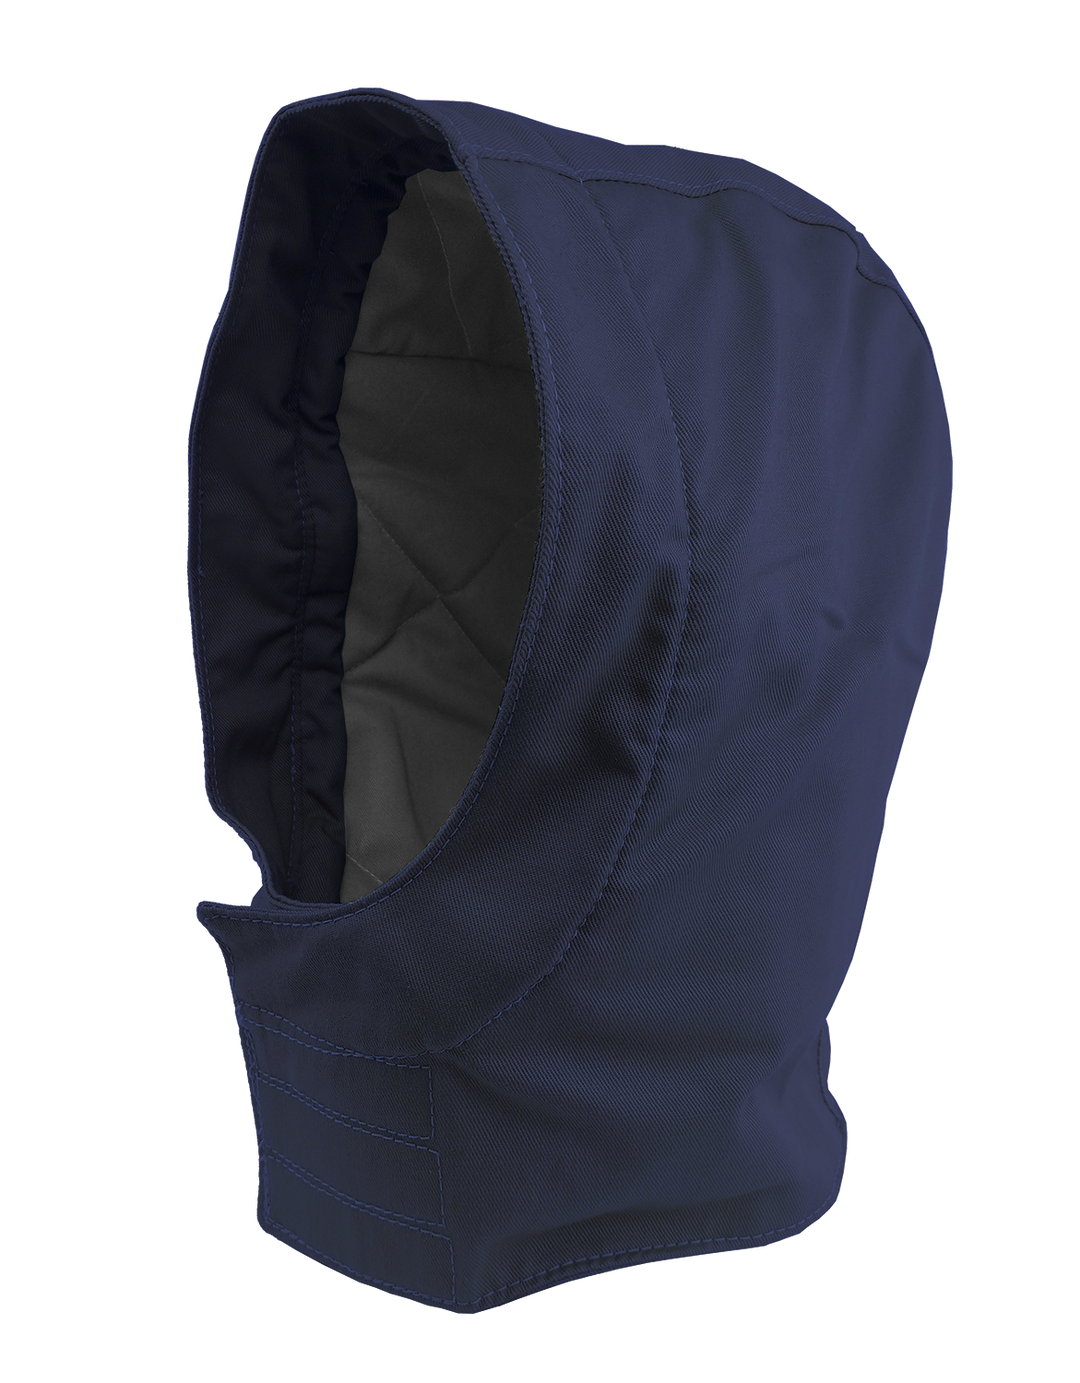 Heavyweight Insulated Bomber Jacket and Removable Hood